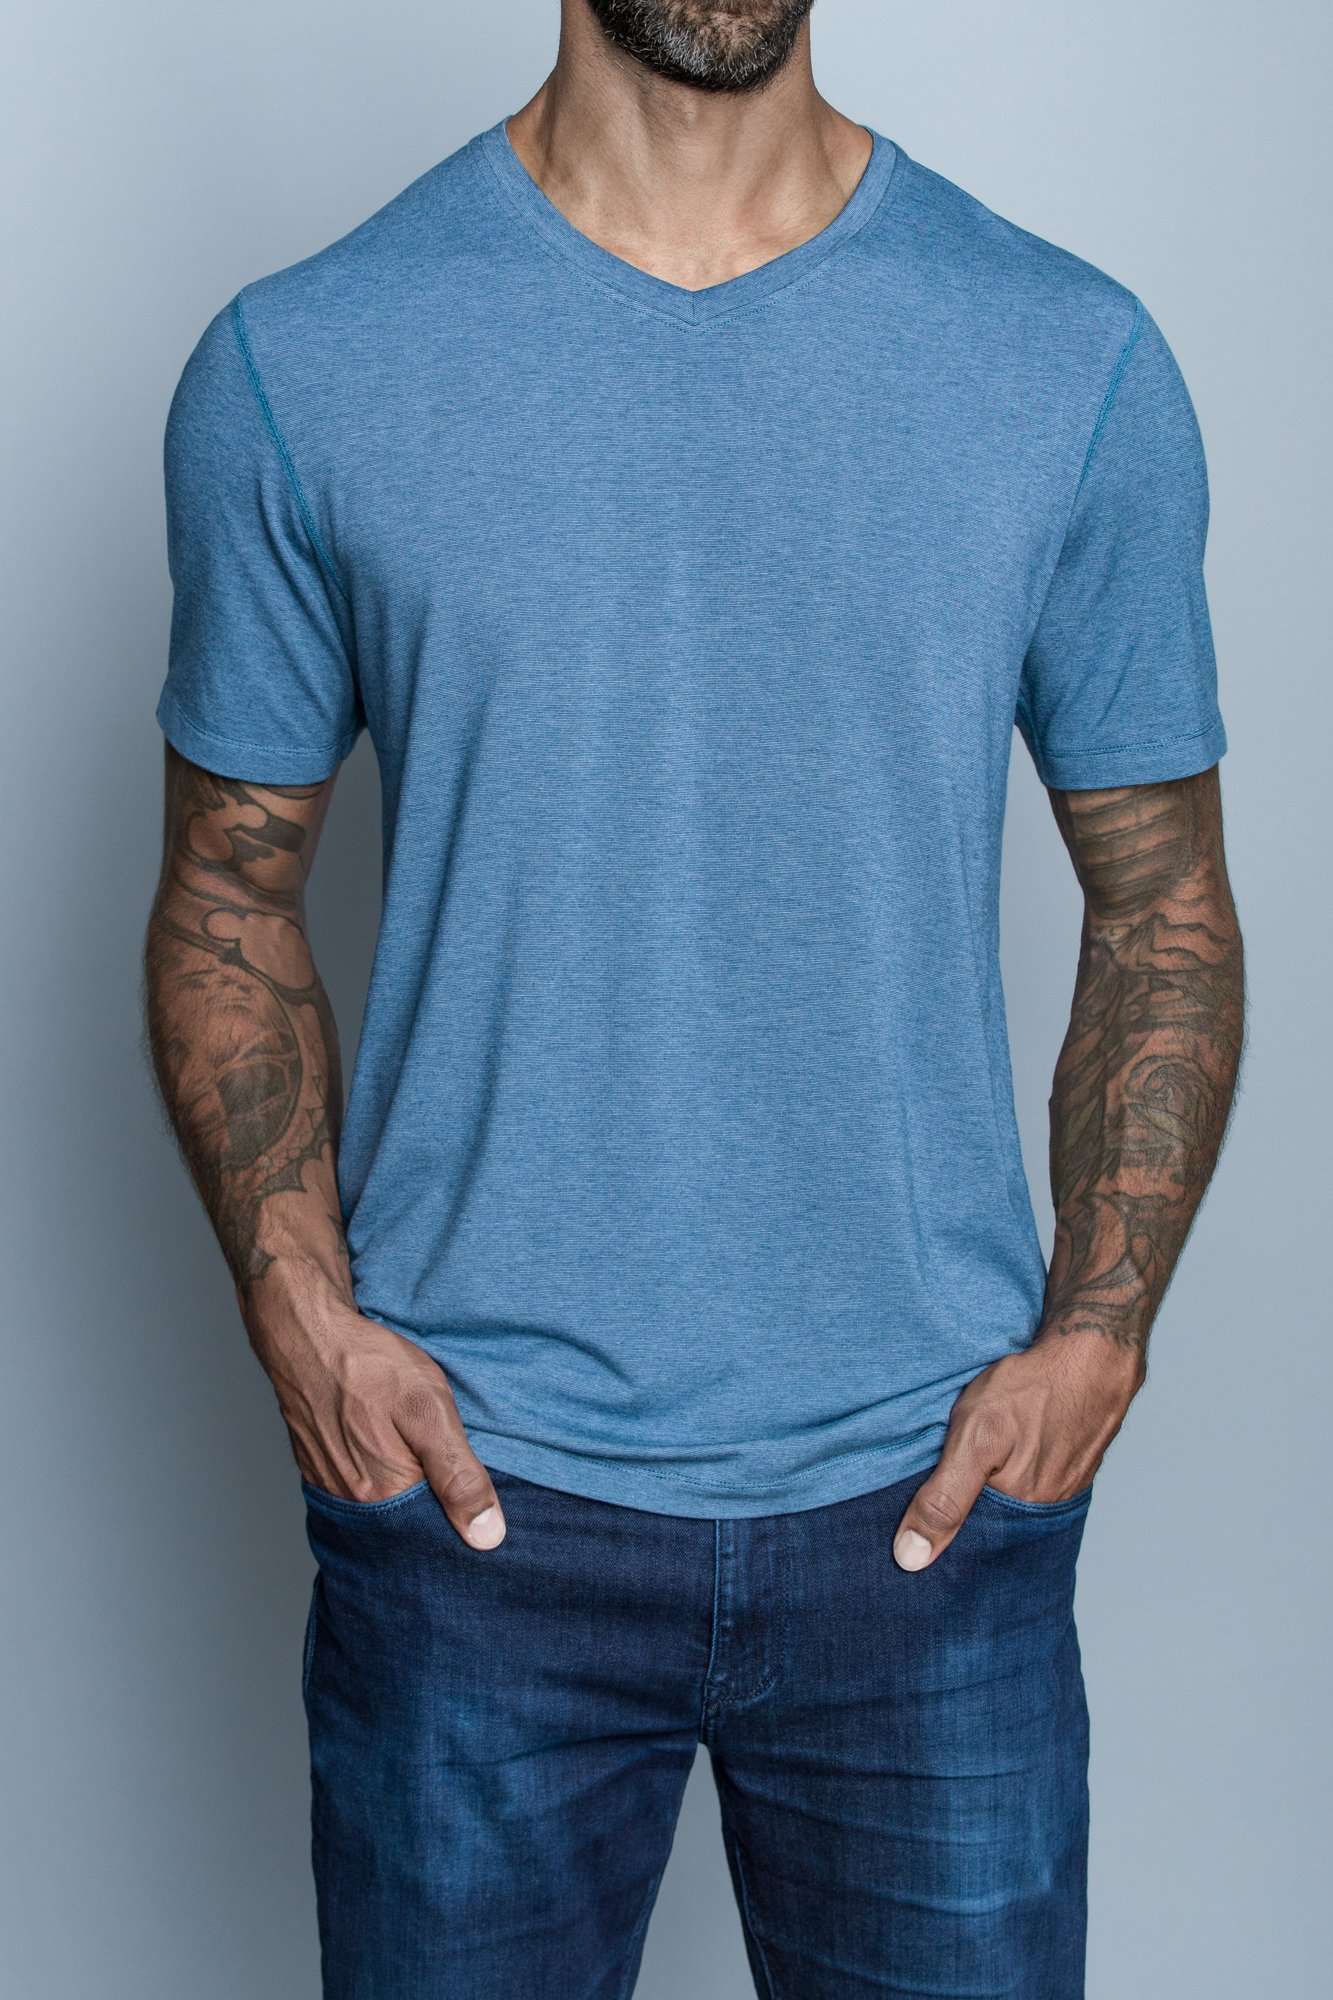 The Navas Lab Drake V2 microstripe tall tee v-neck in light blue. Long T-shirt for tall guys for everyday use.